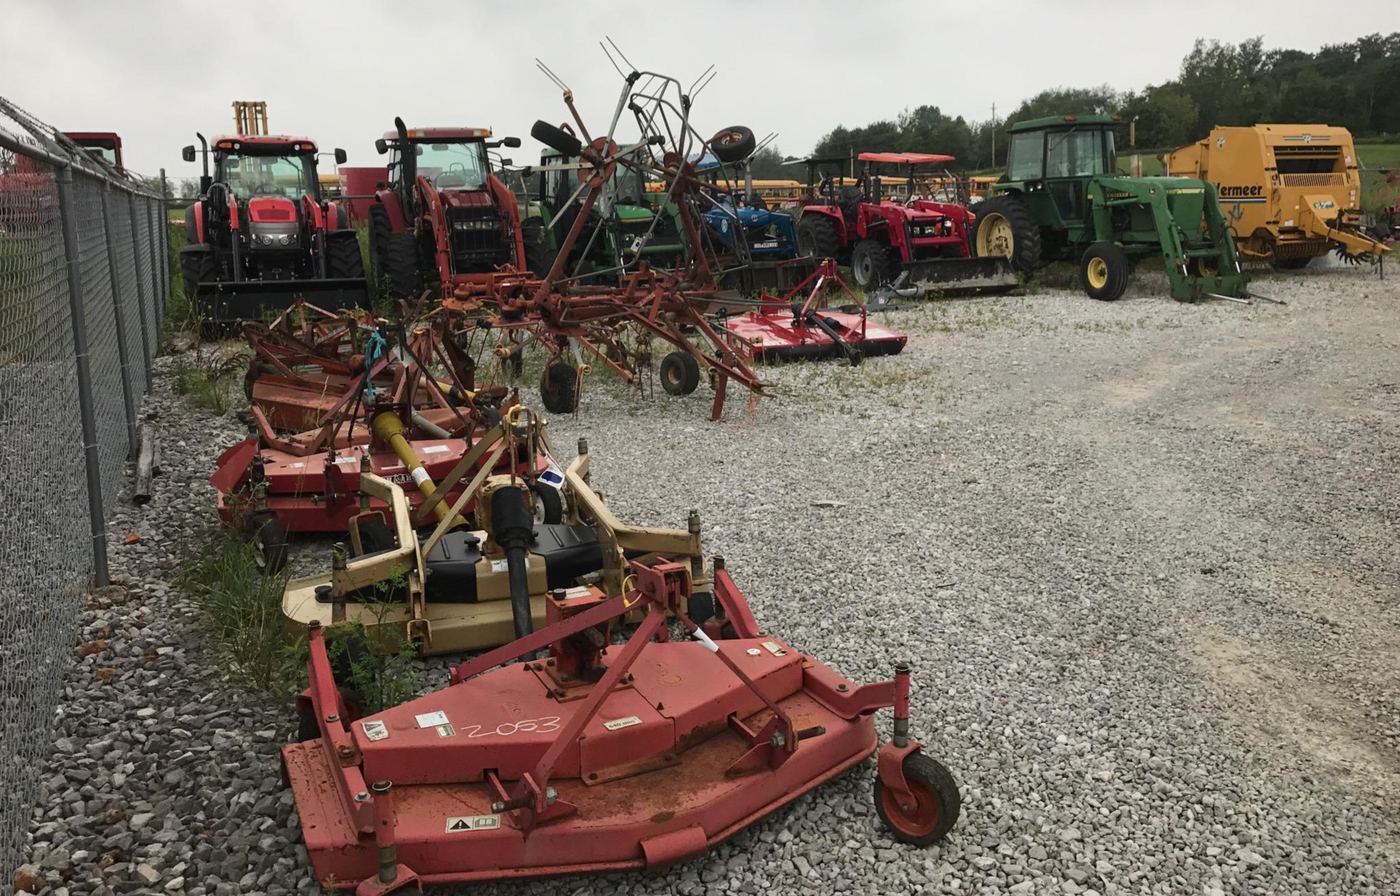 These tractors and mowers were among the assets seized from convicted fraudster Jeff Gentry that were auctioned by the U.S. Marshals Service at a public auction on August 26, 2017 in Sparta, Tennessee.